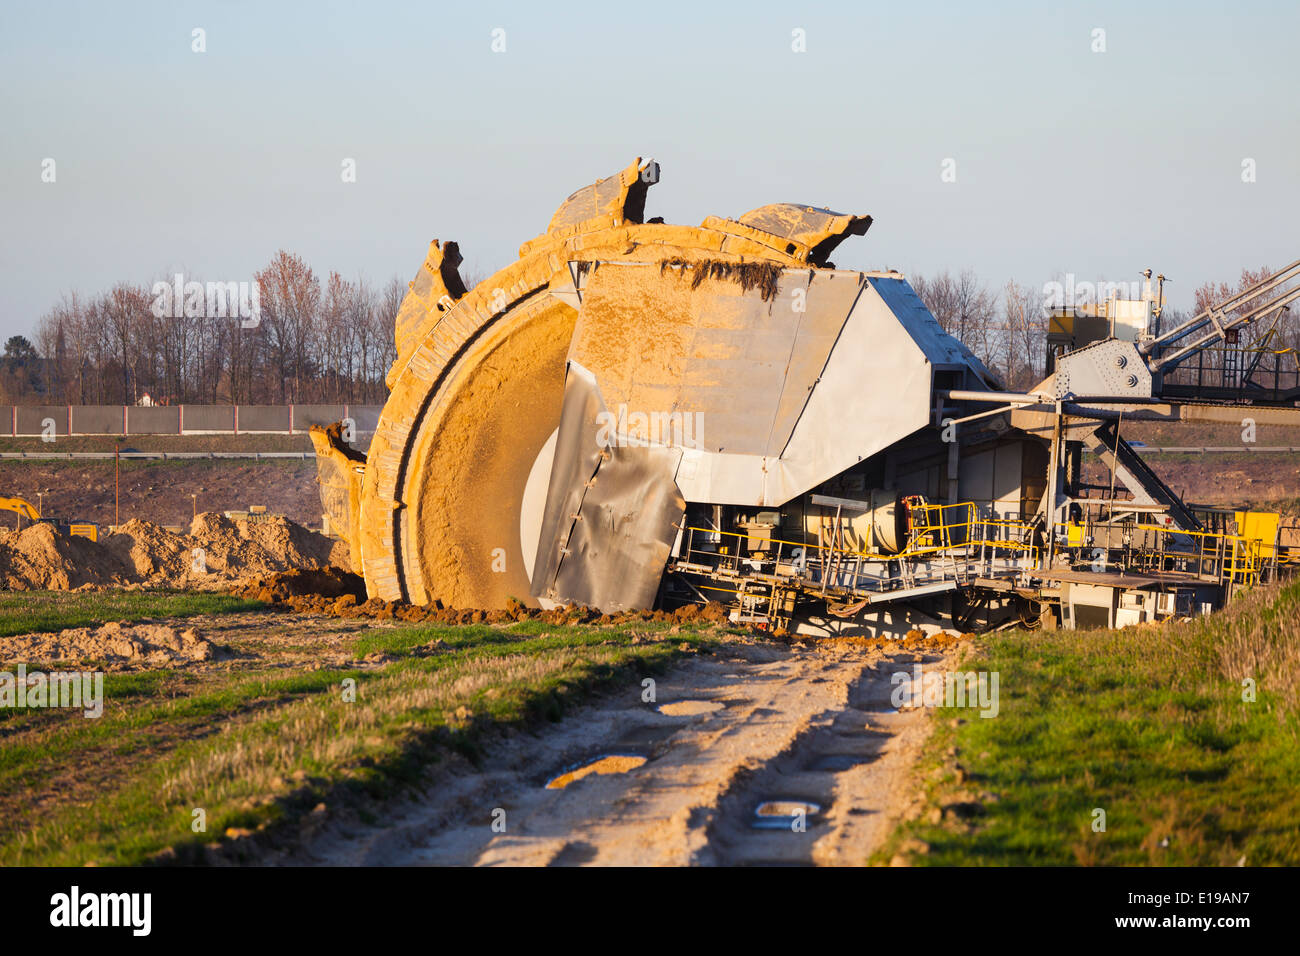 A giant Bucket Wheel Excavator at work in a lignite pit mine with a dirt road leading to it in the foreground Stock Photo